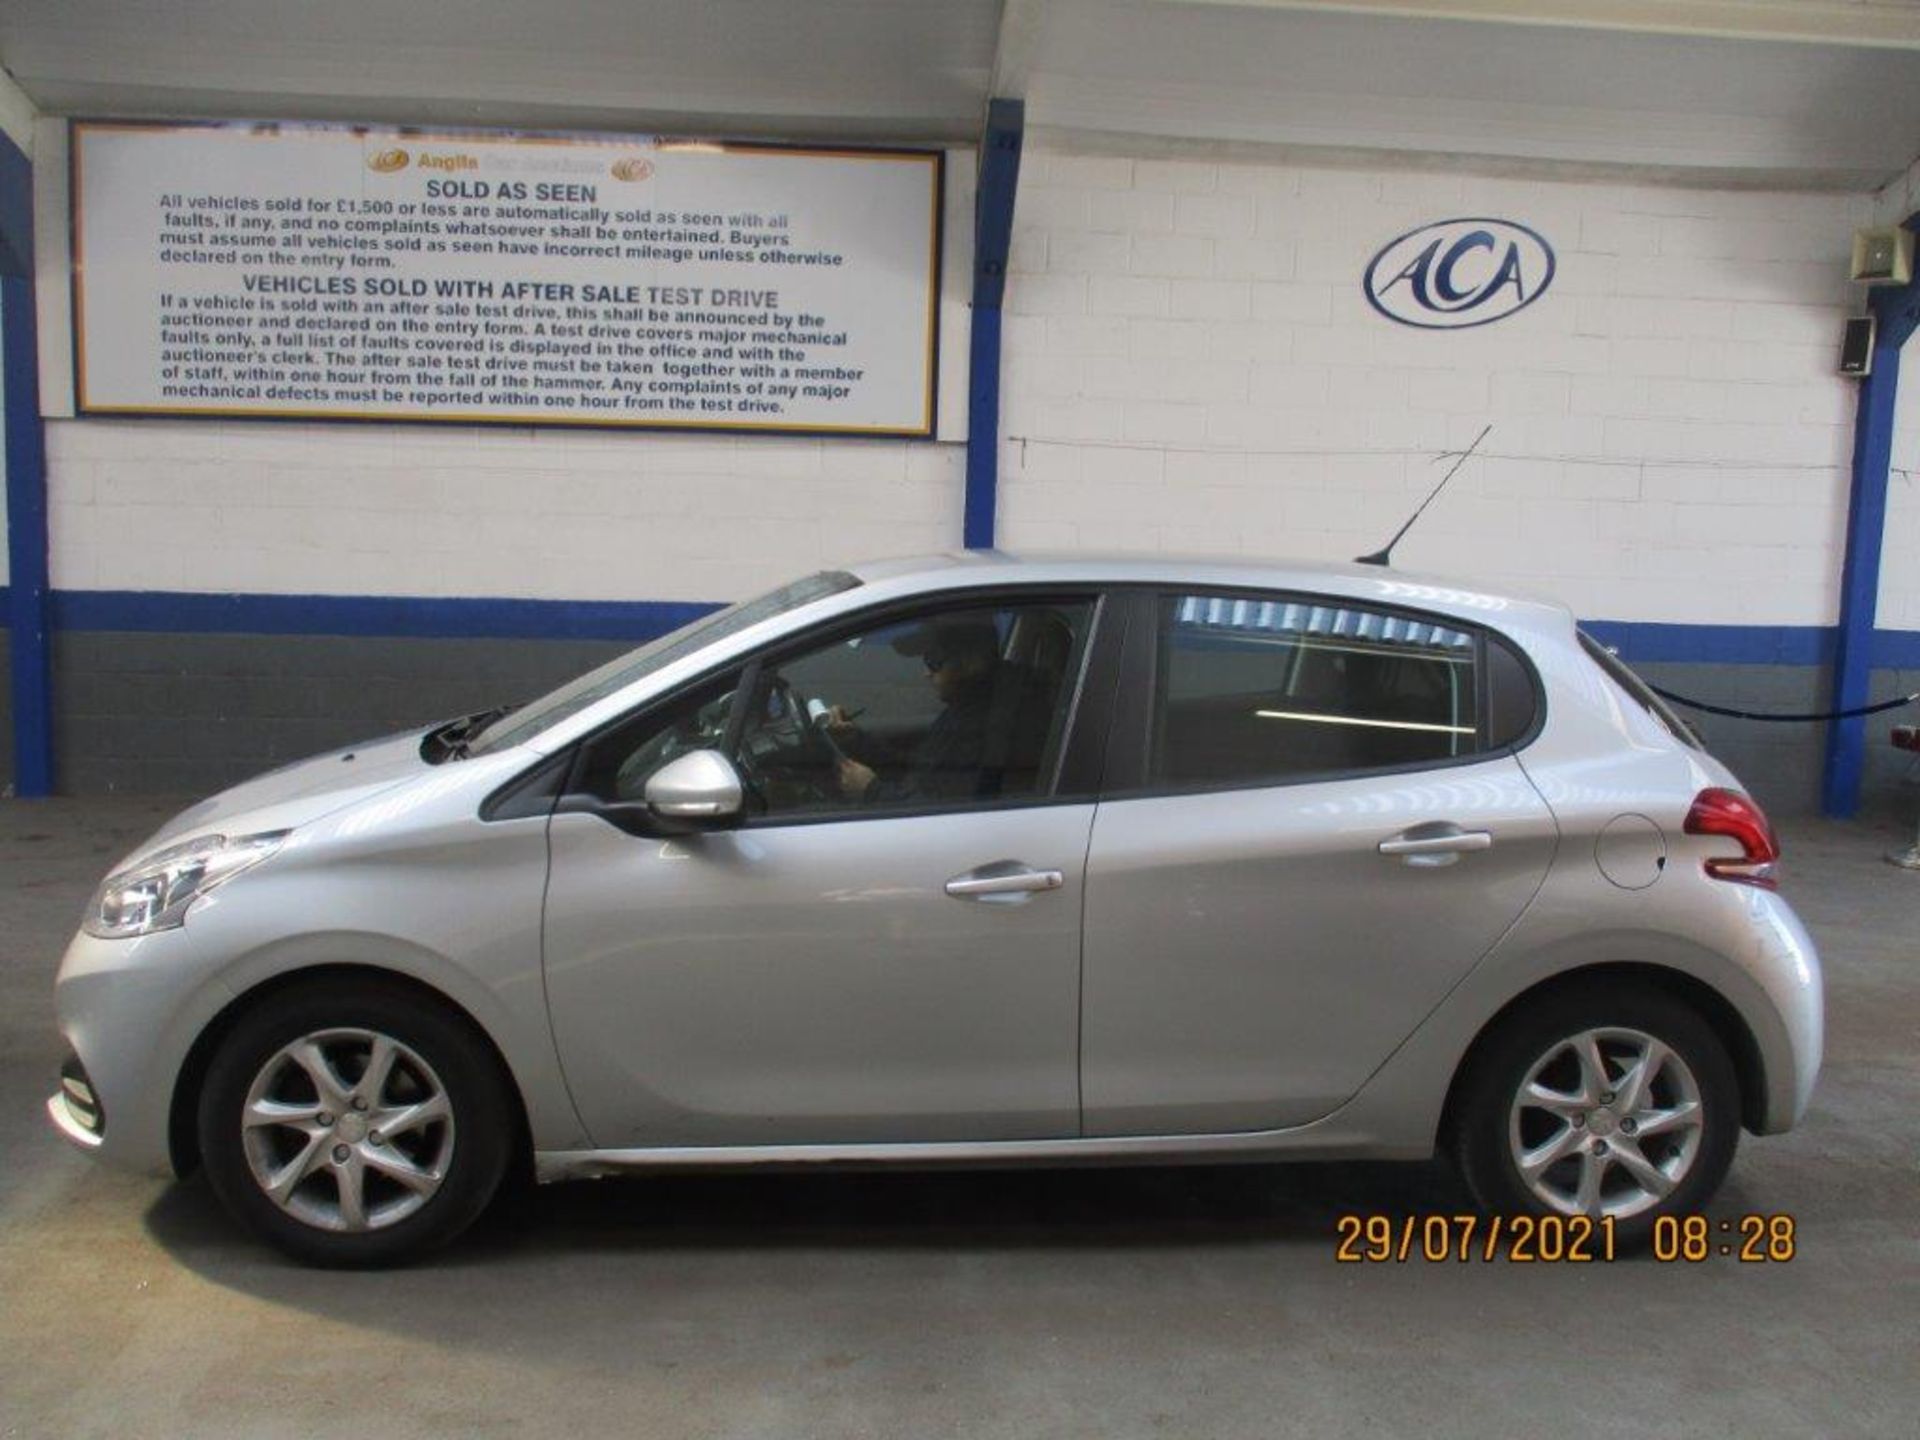 17 67 Peugeot 208 Active 5dr - Image 2 of 18